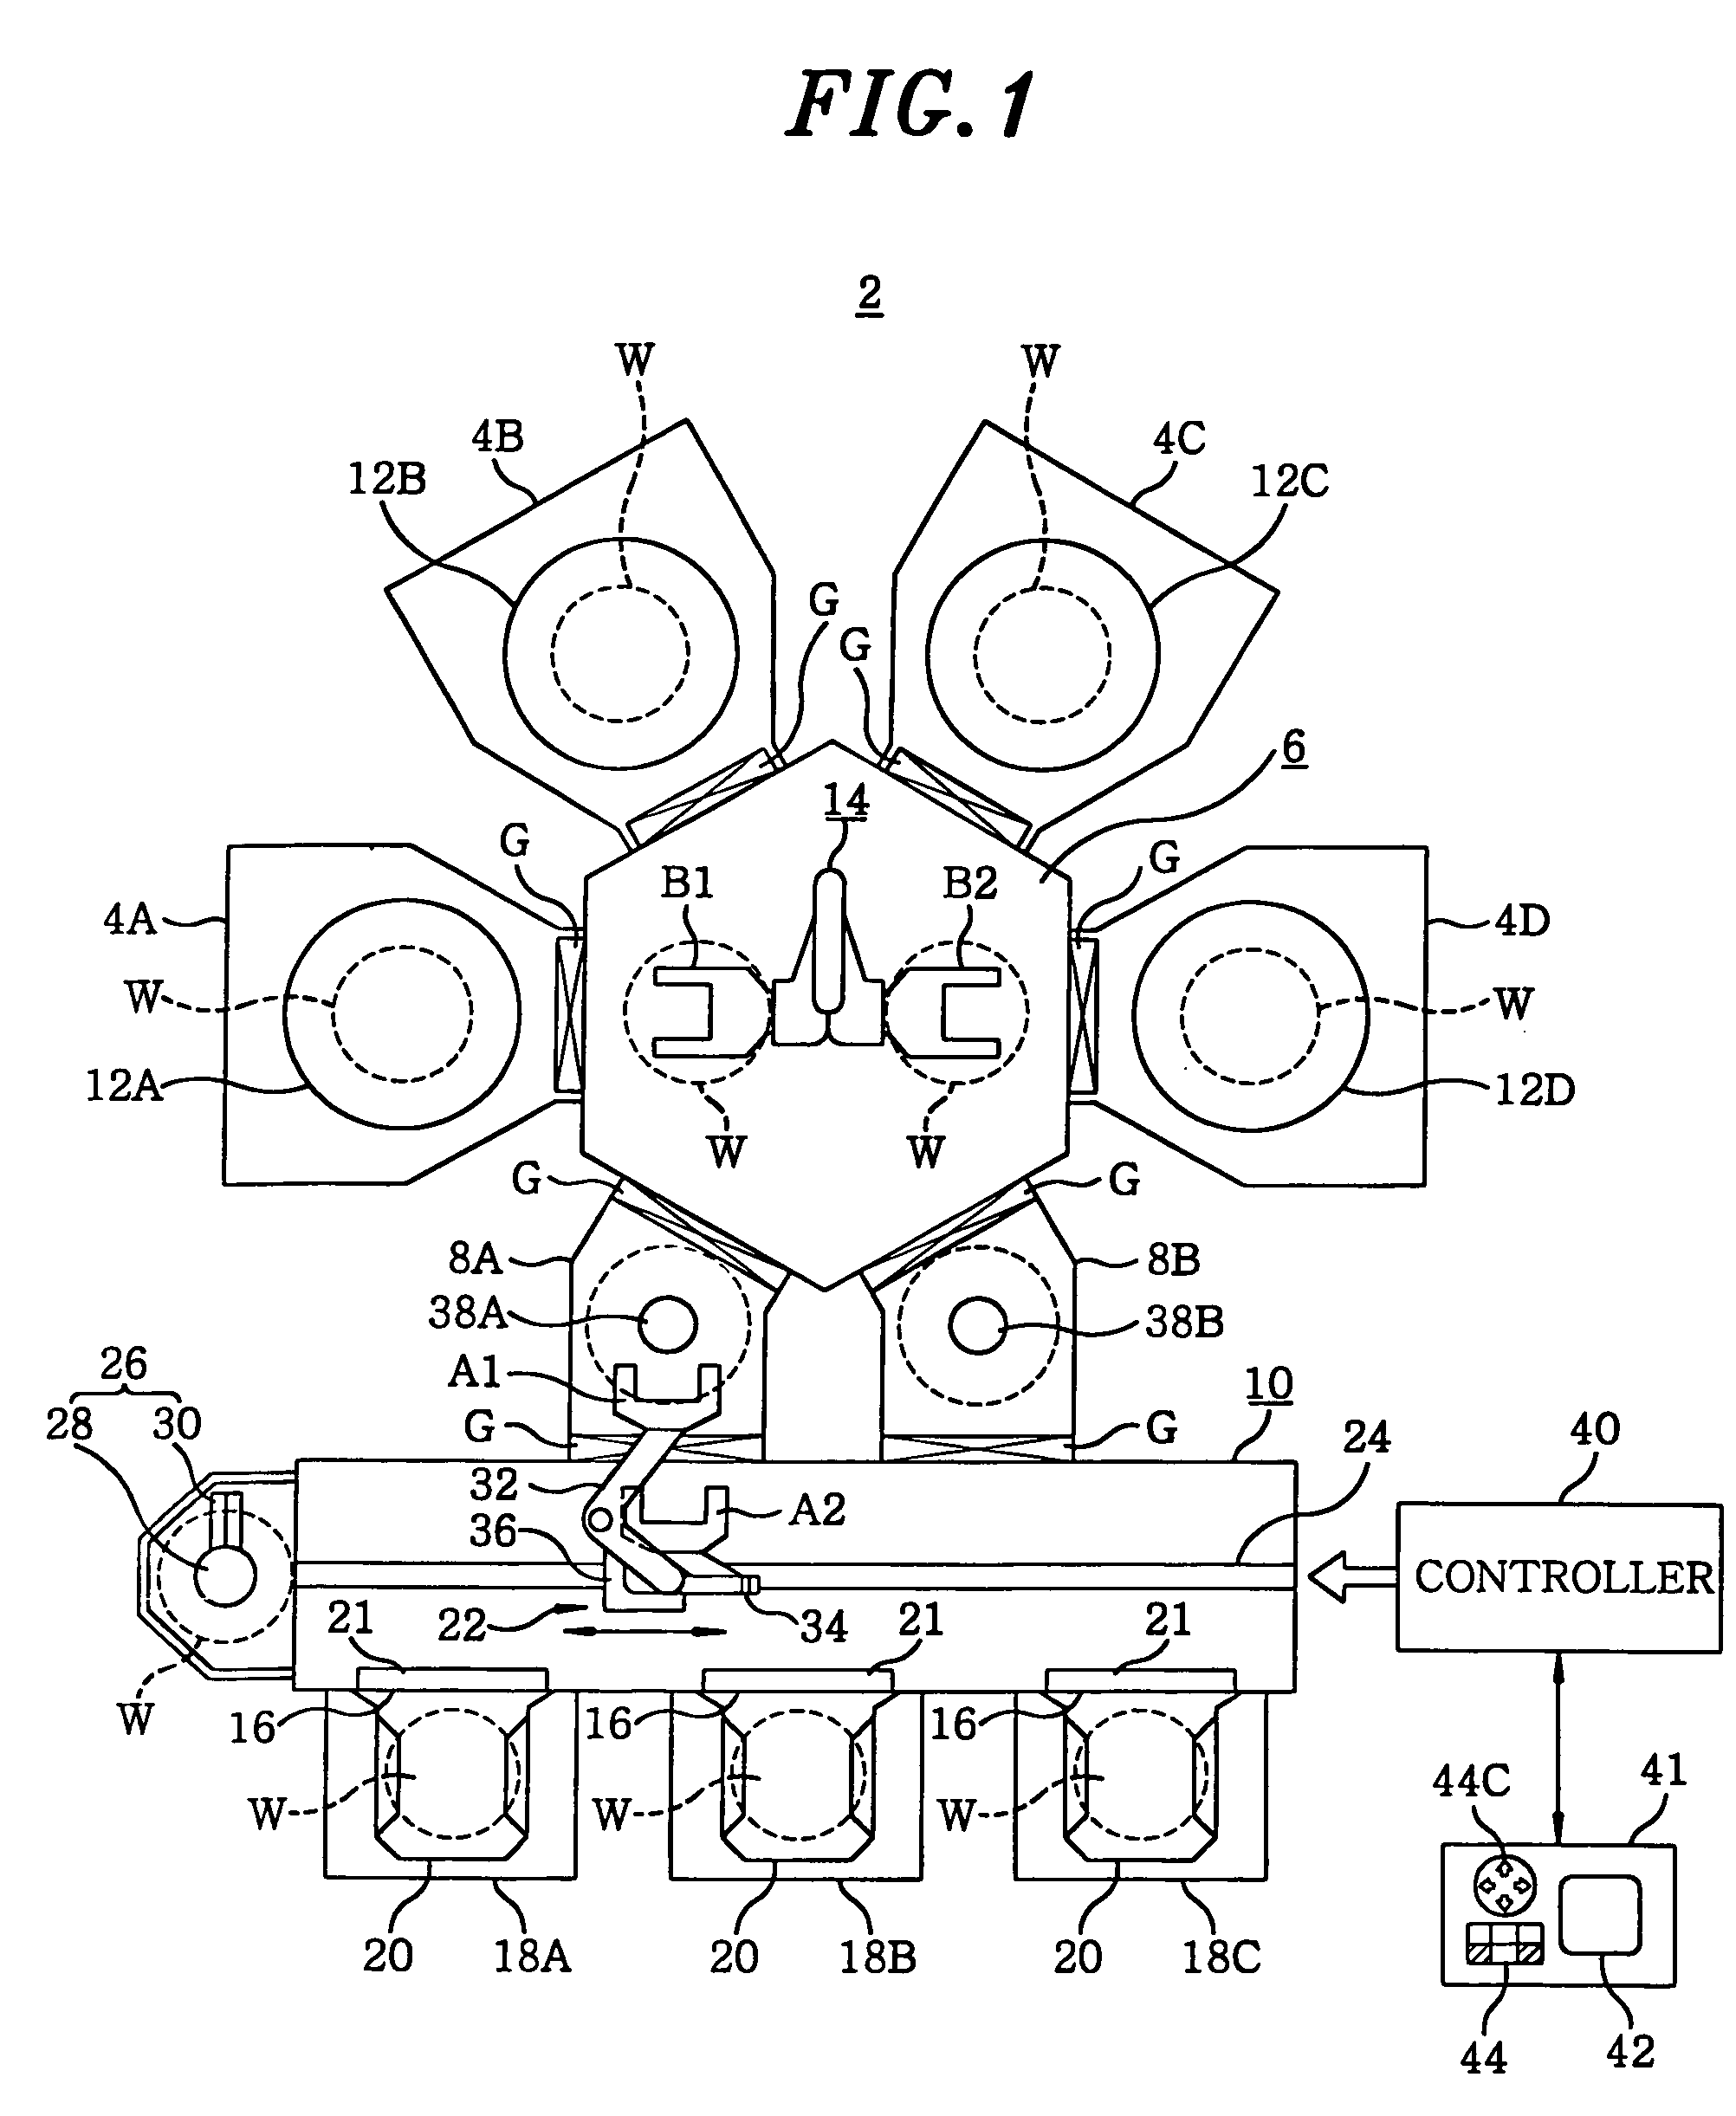 Teaching method and processing system